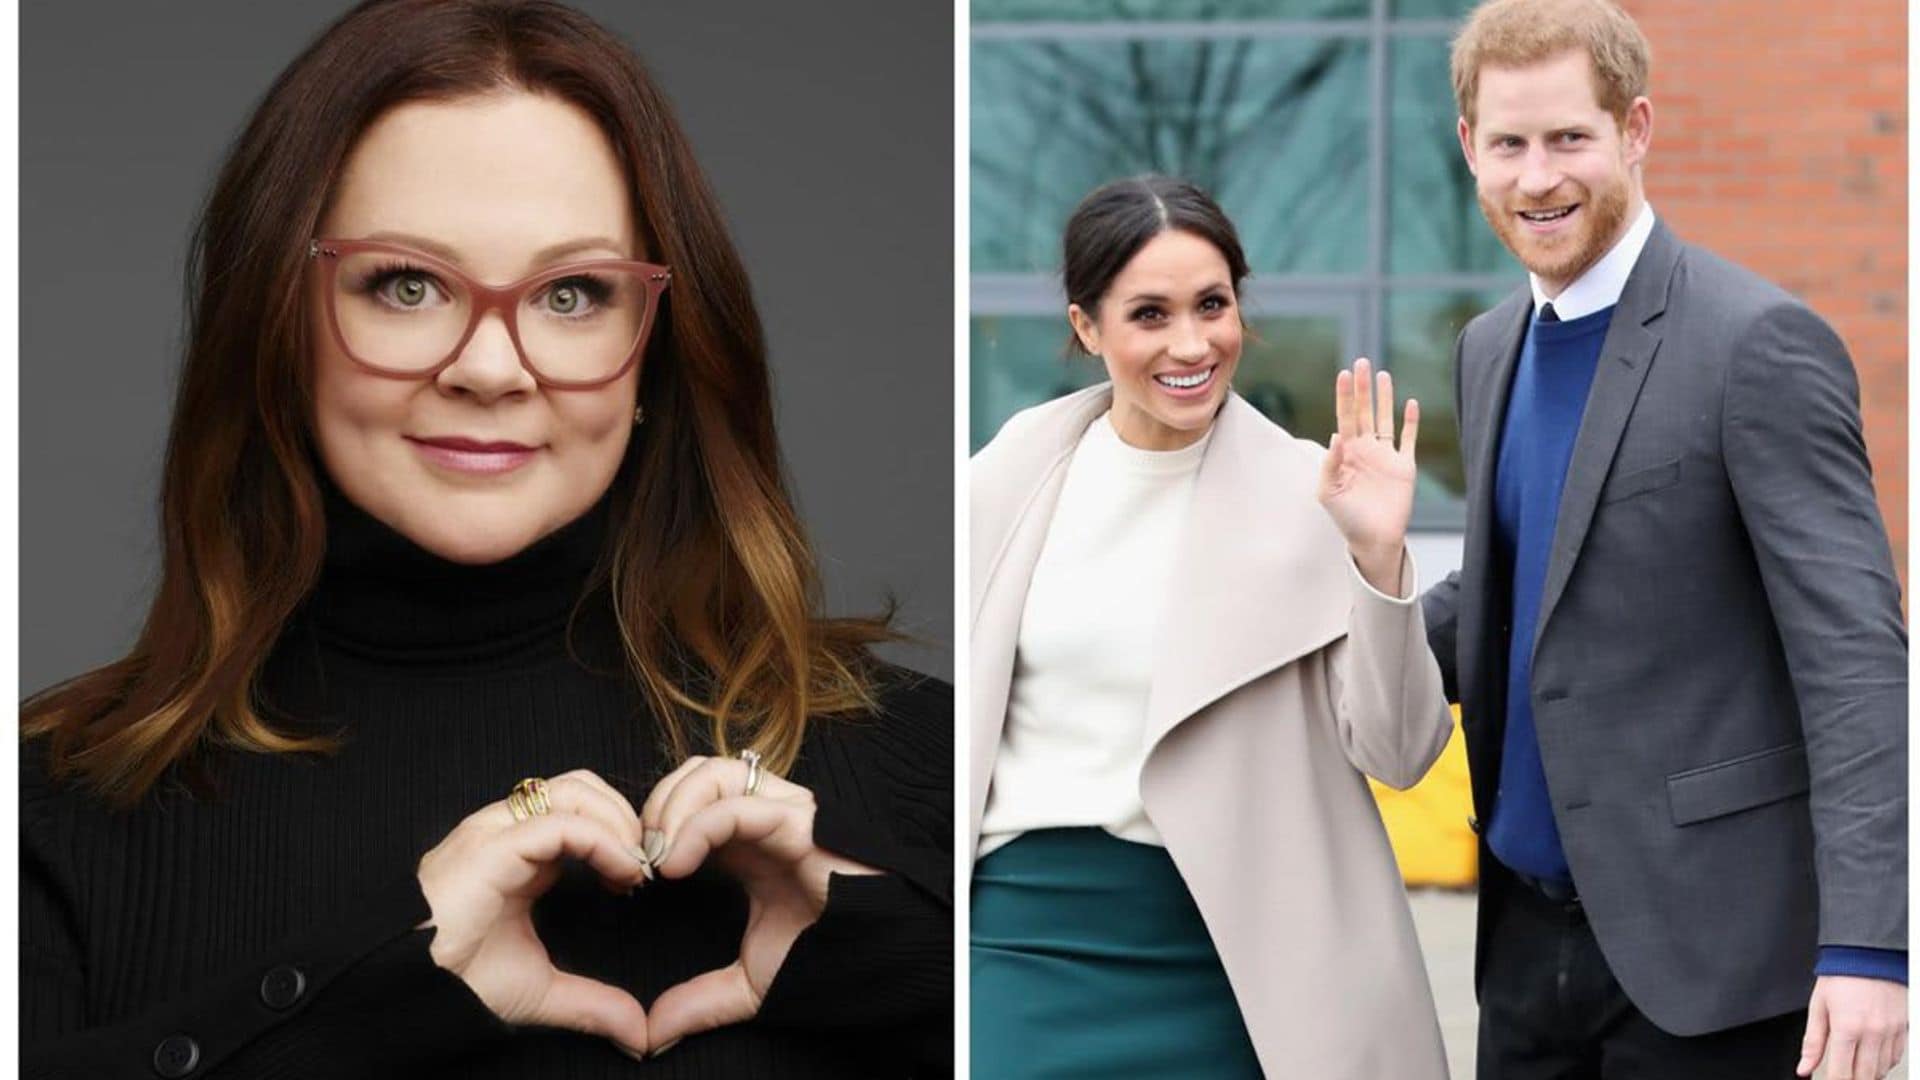 Melissa McCarthy praises Prince Harry and Meghan Markle for starting a new chapter in life